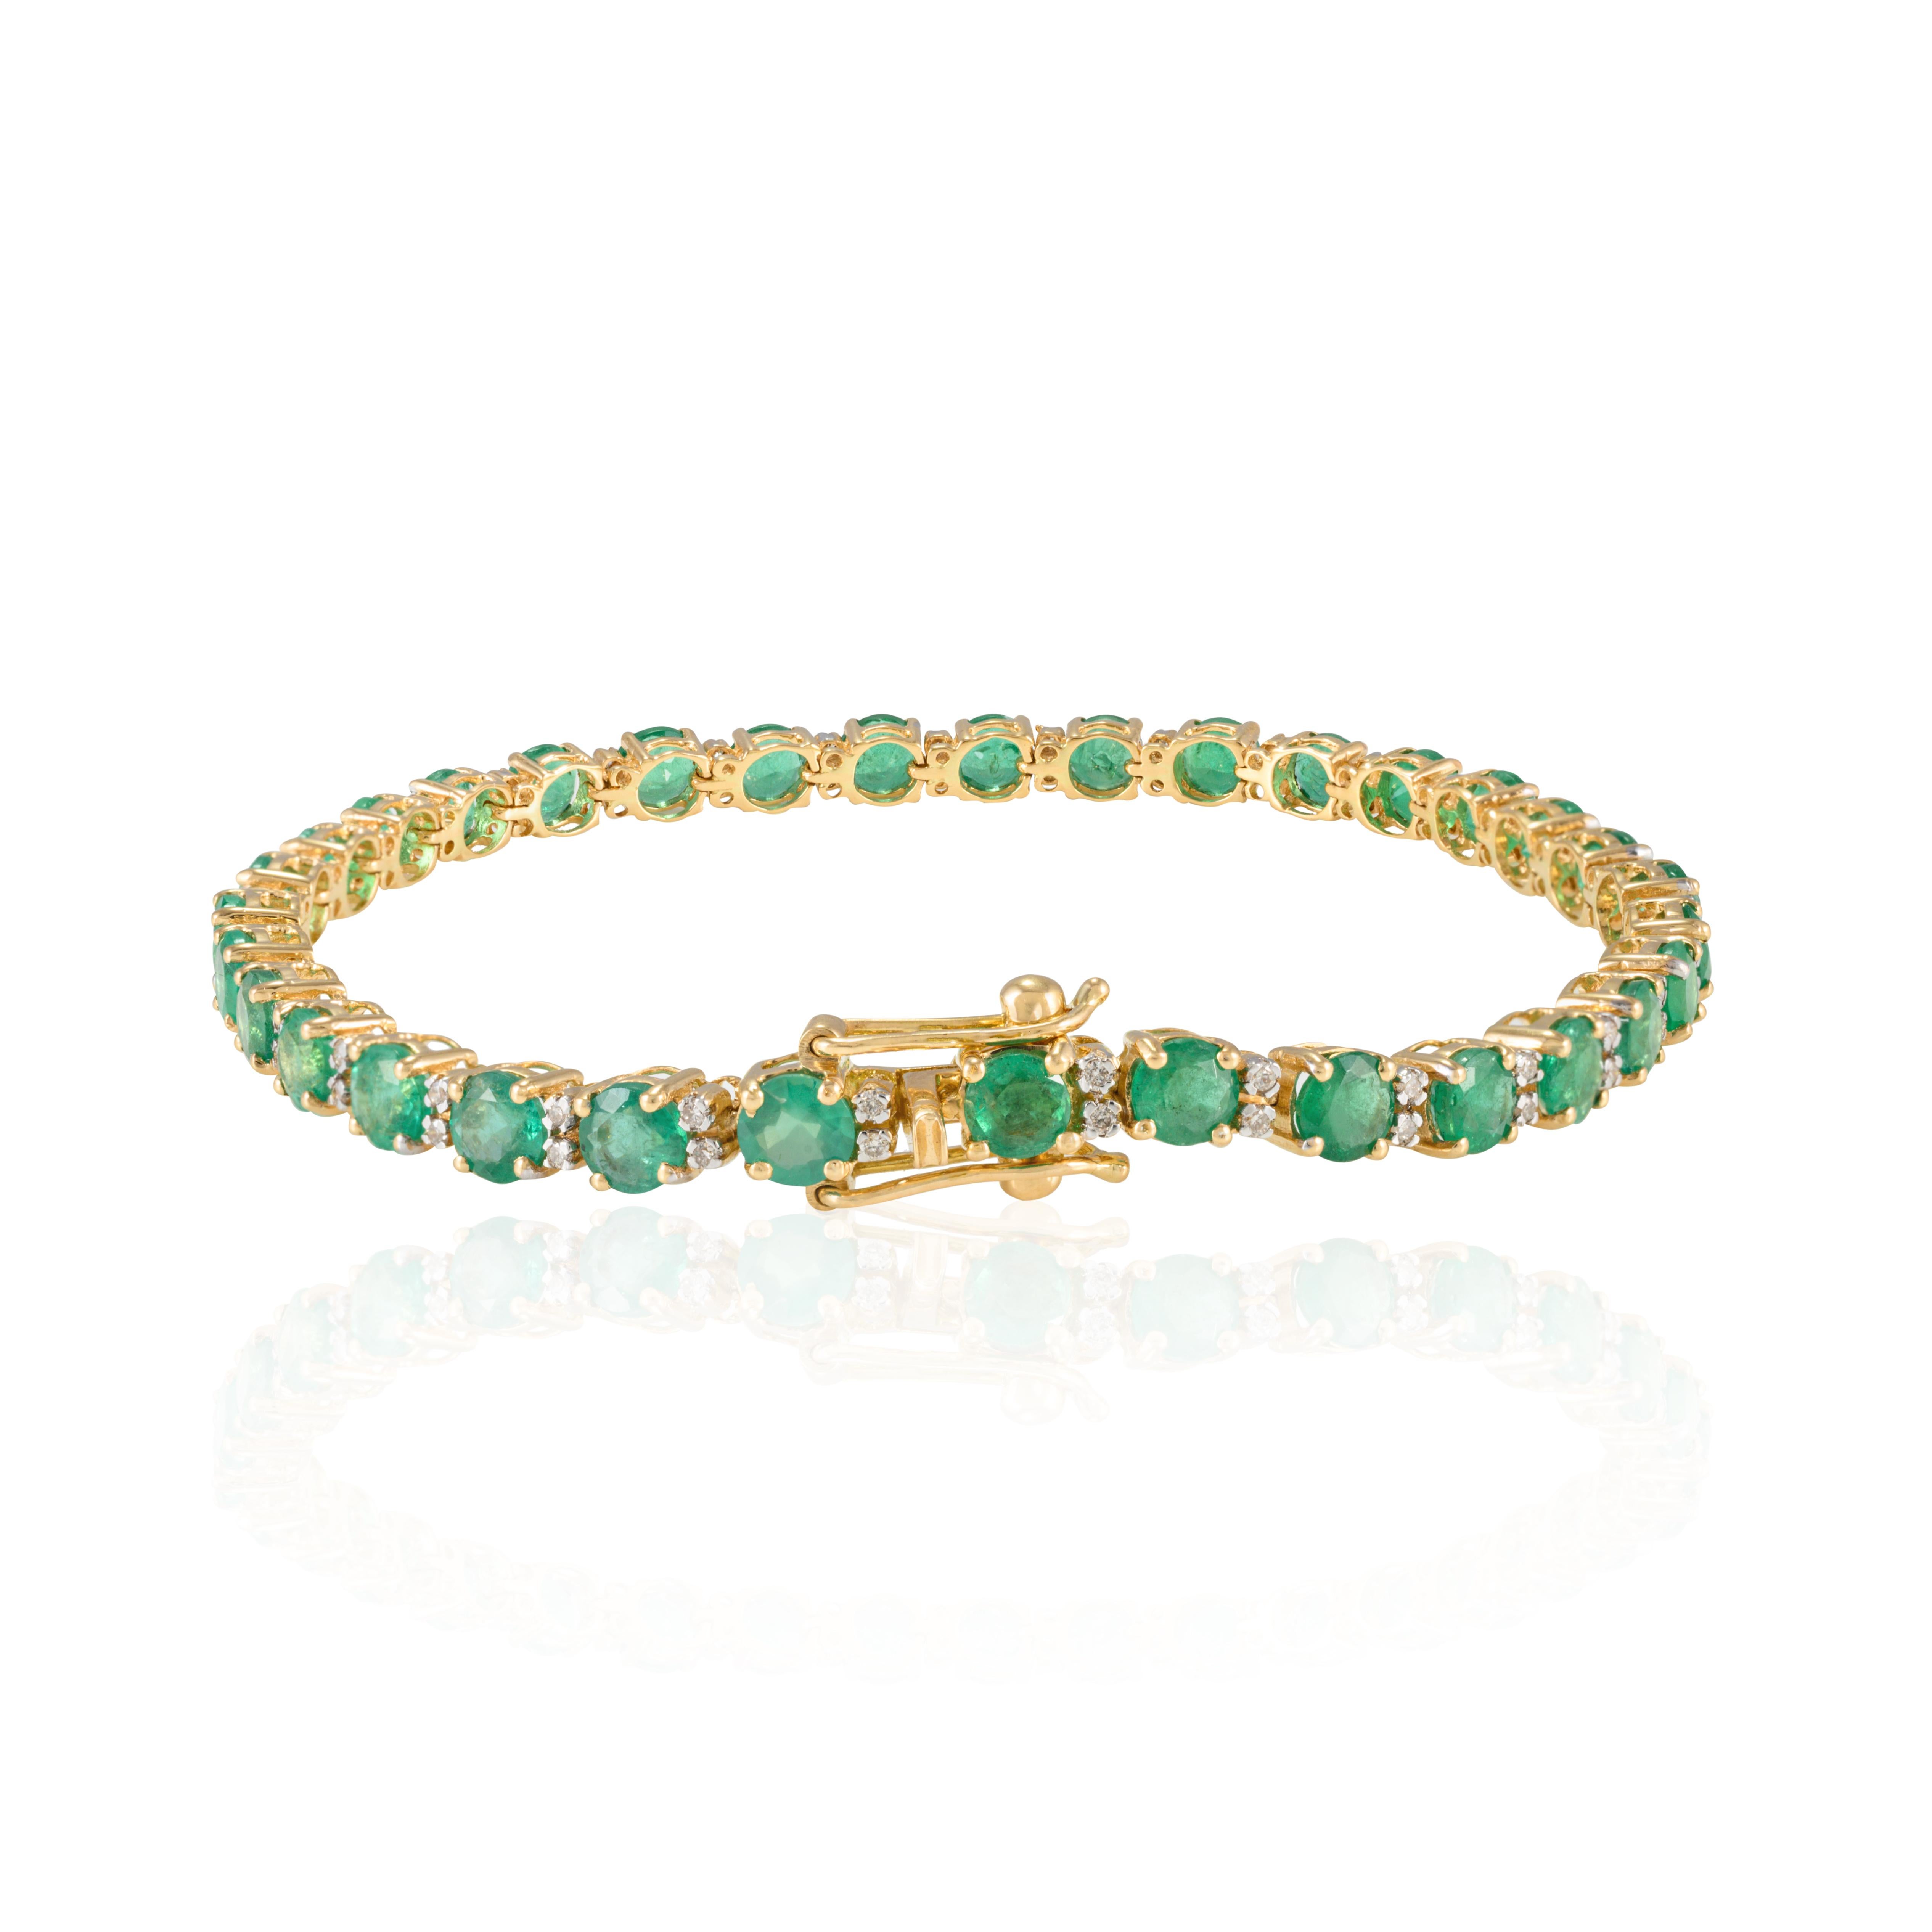 This Certified 7.9 CTW Round Cut Emerald and Diamond Tennis Bracelet in 18K gold showcases endlessly sparkling natural emerald, weighing 7.9 carat and diamonds weighing 0.33 carat. It measures 7 inches long in length. 
Emerald enhances intellectual